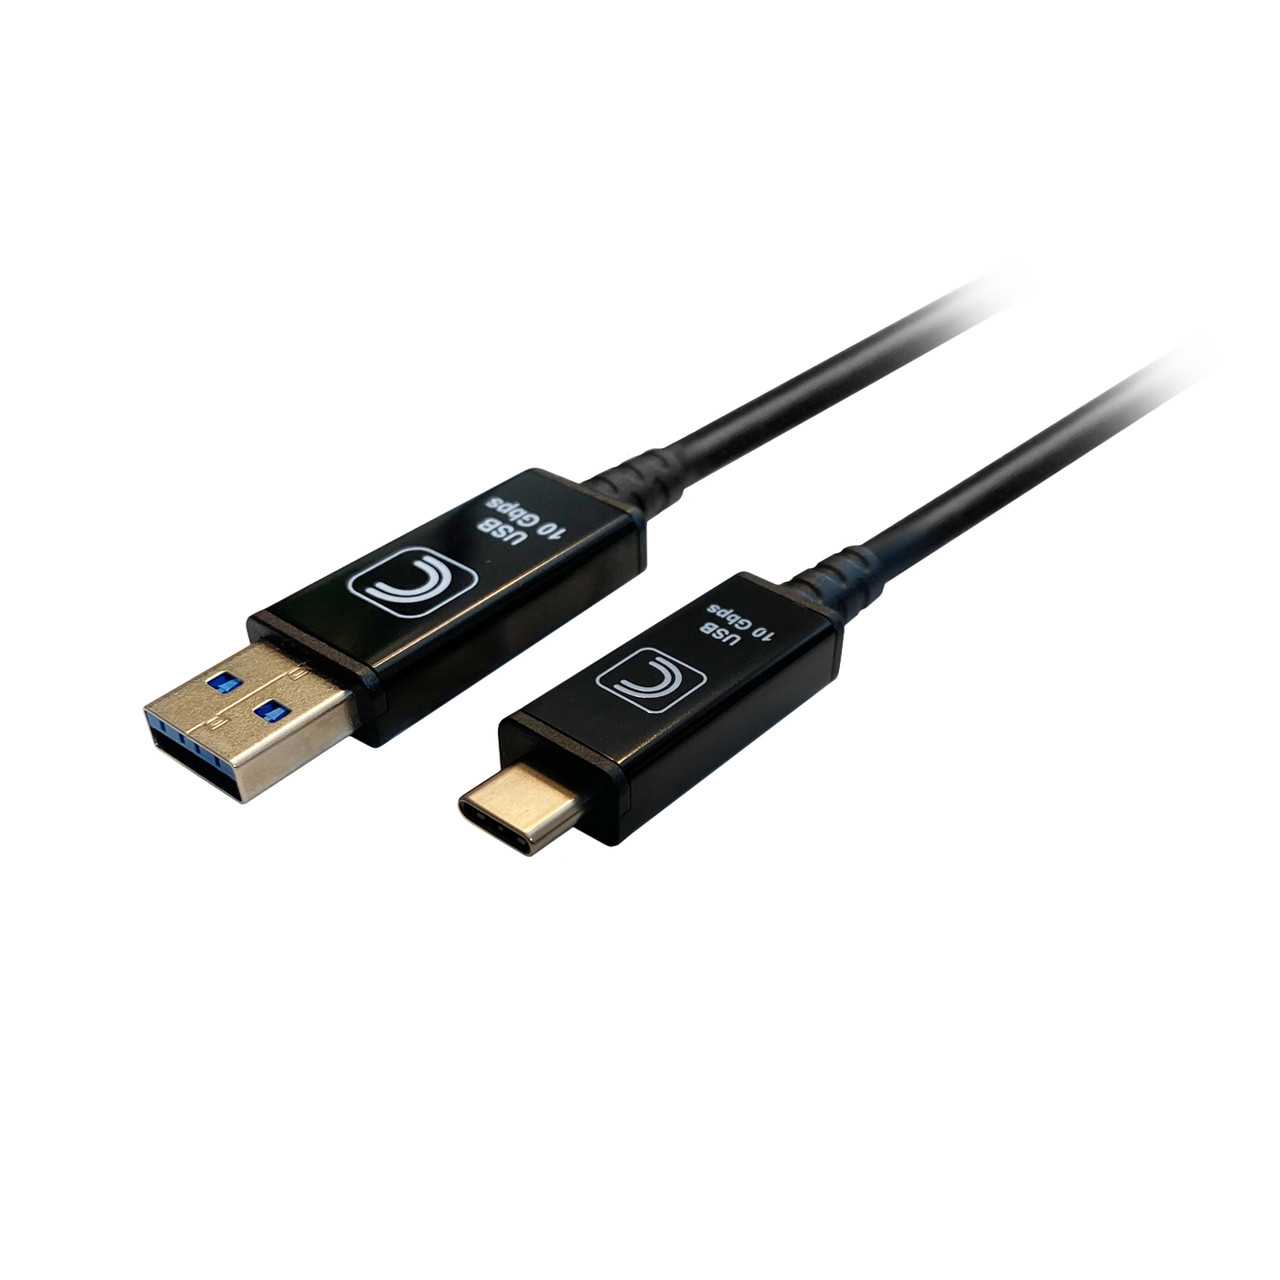 USB A to C 6′ Cable for MPVI2/2+/3